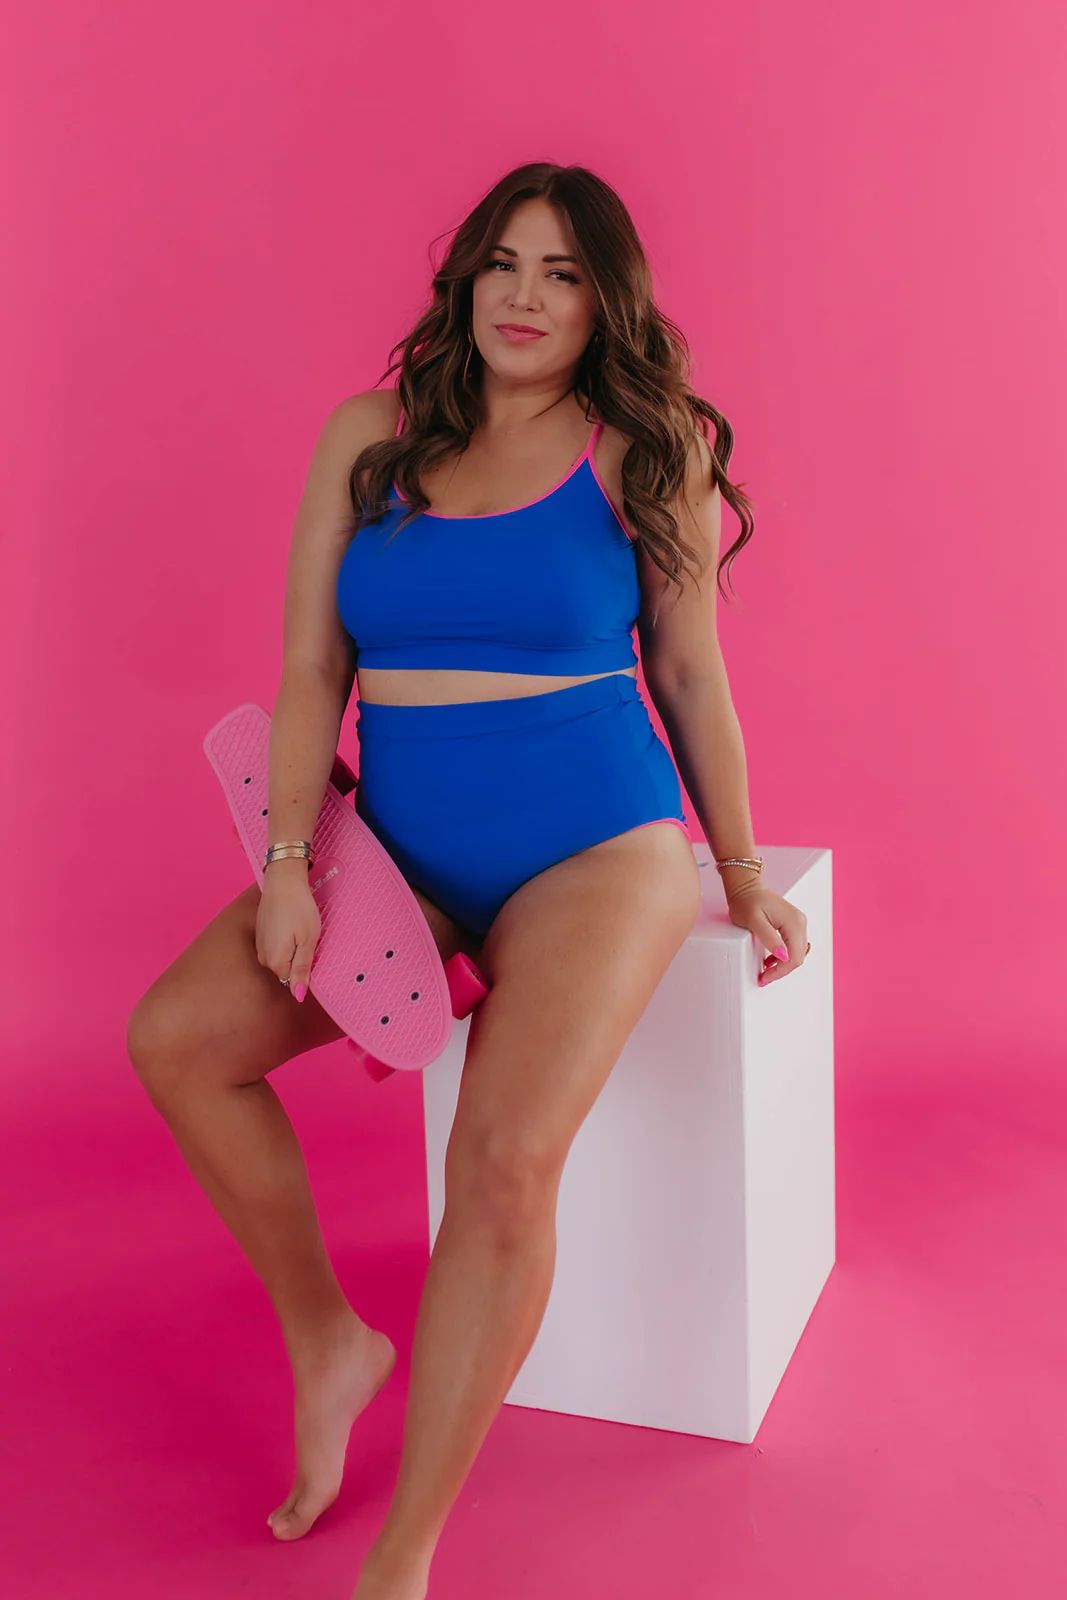 MALIBU TWO PIECE IN ROYAL BLUE AND ELECTRIC PINK TRIM BY PINK DESERT | Pink Desert